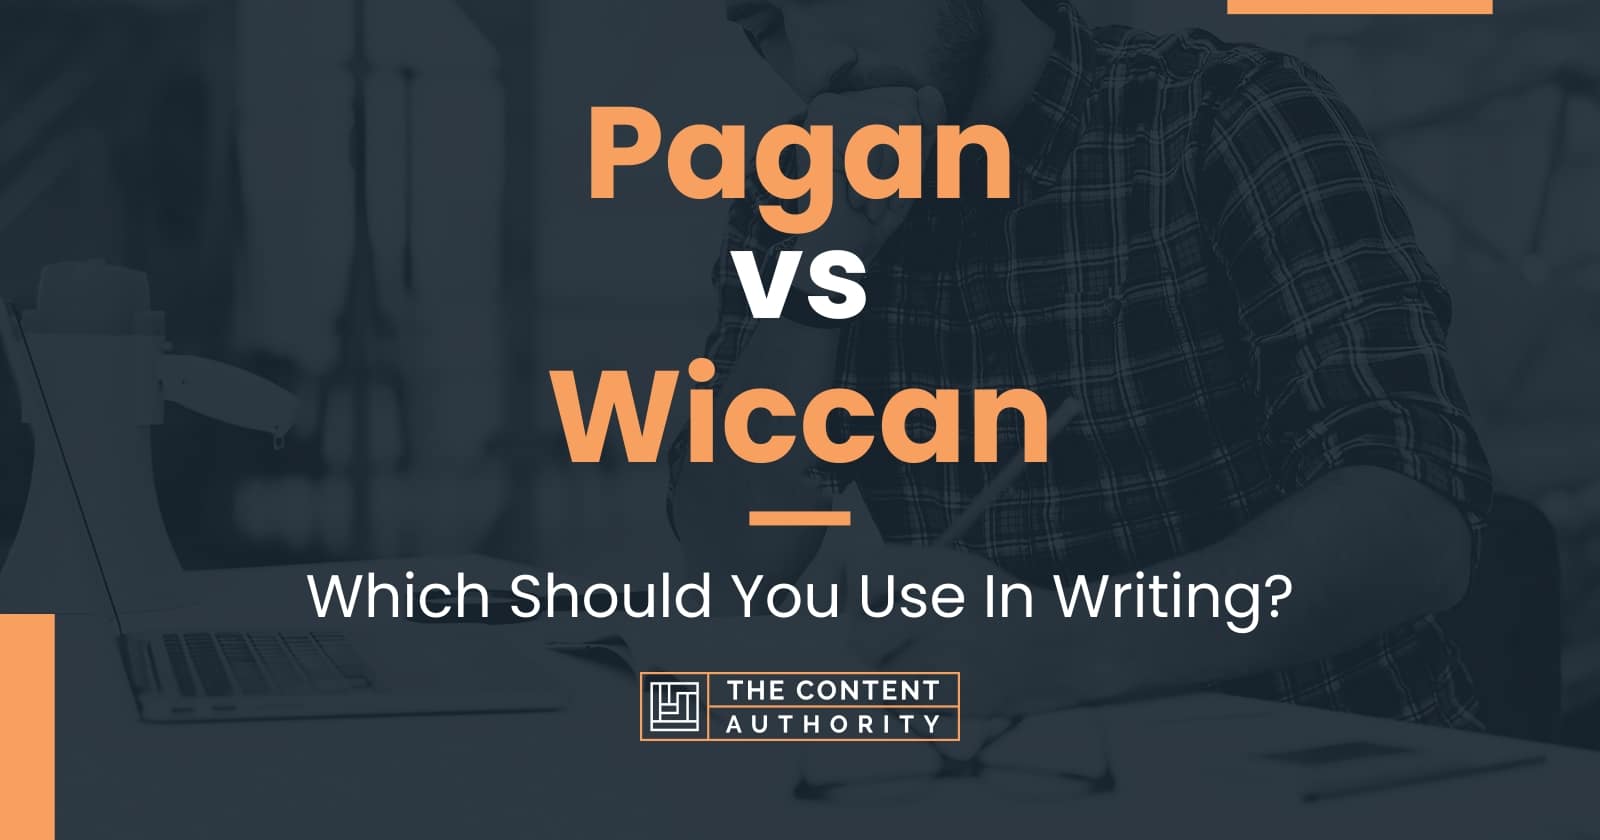 Pagan vs Wiccan: Which Should You Use In Writing?